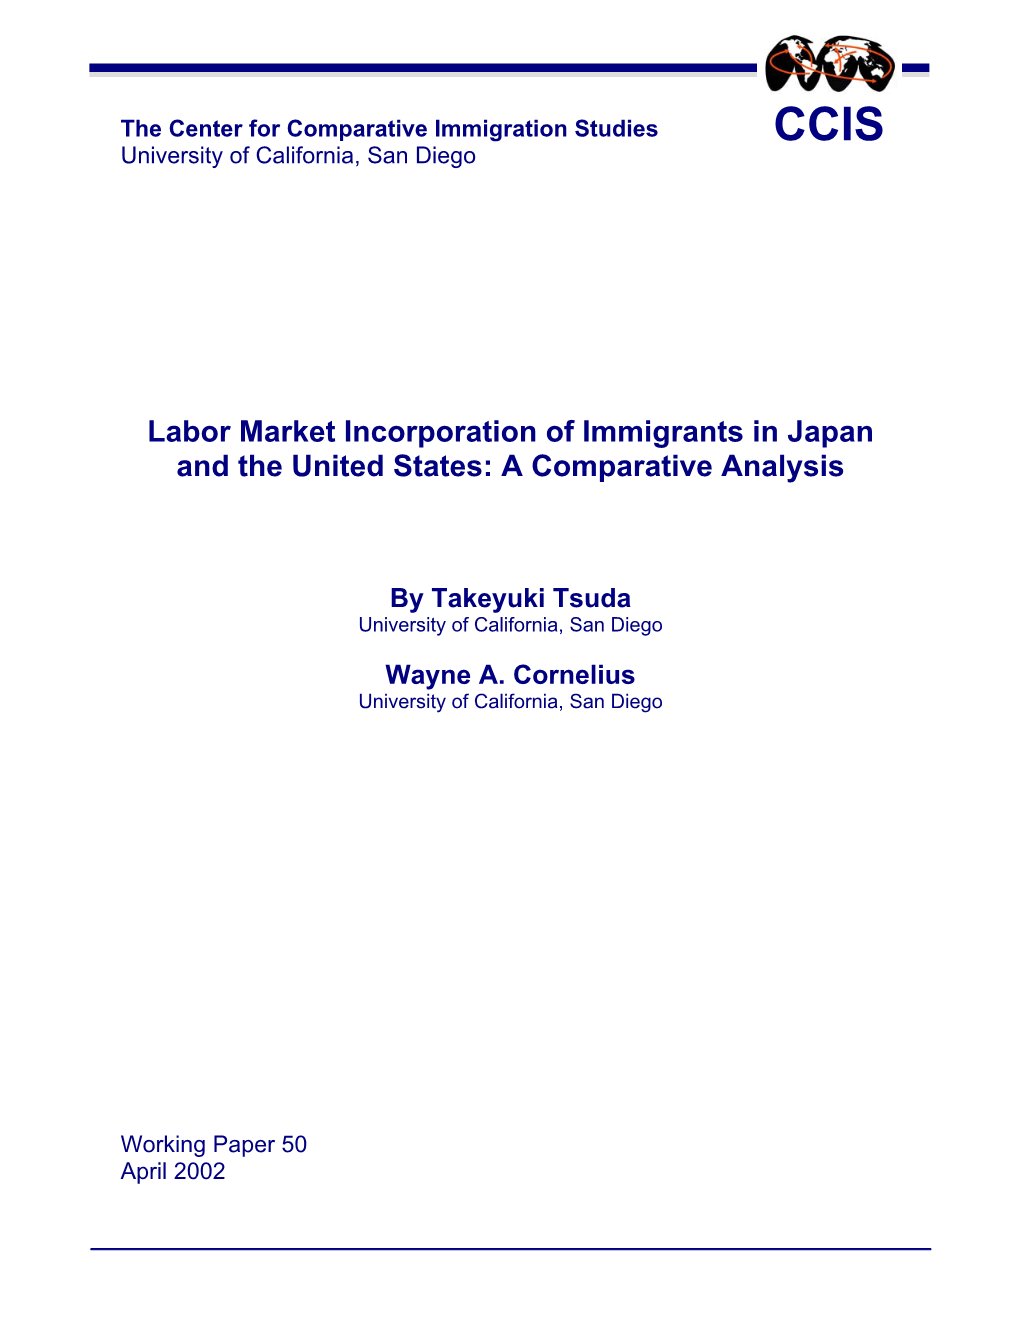 Labor Market Incorporation of Immigrants in Japan and the United States: a Comparative Analysis